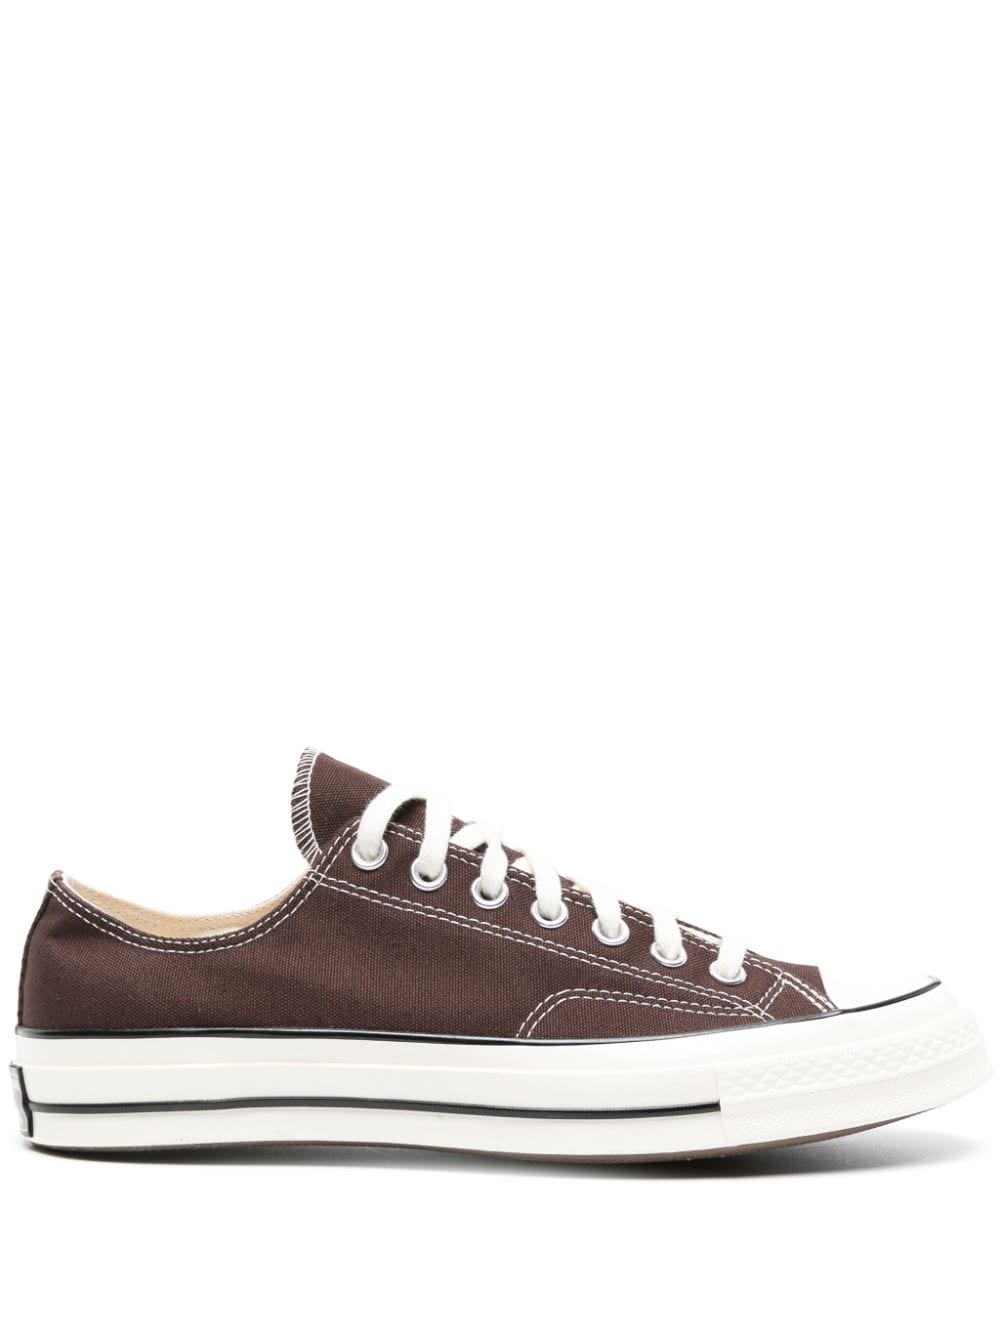 Converse Chuck Taylor All Star Lace-up Sneakers In Brown